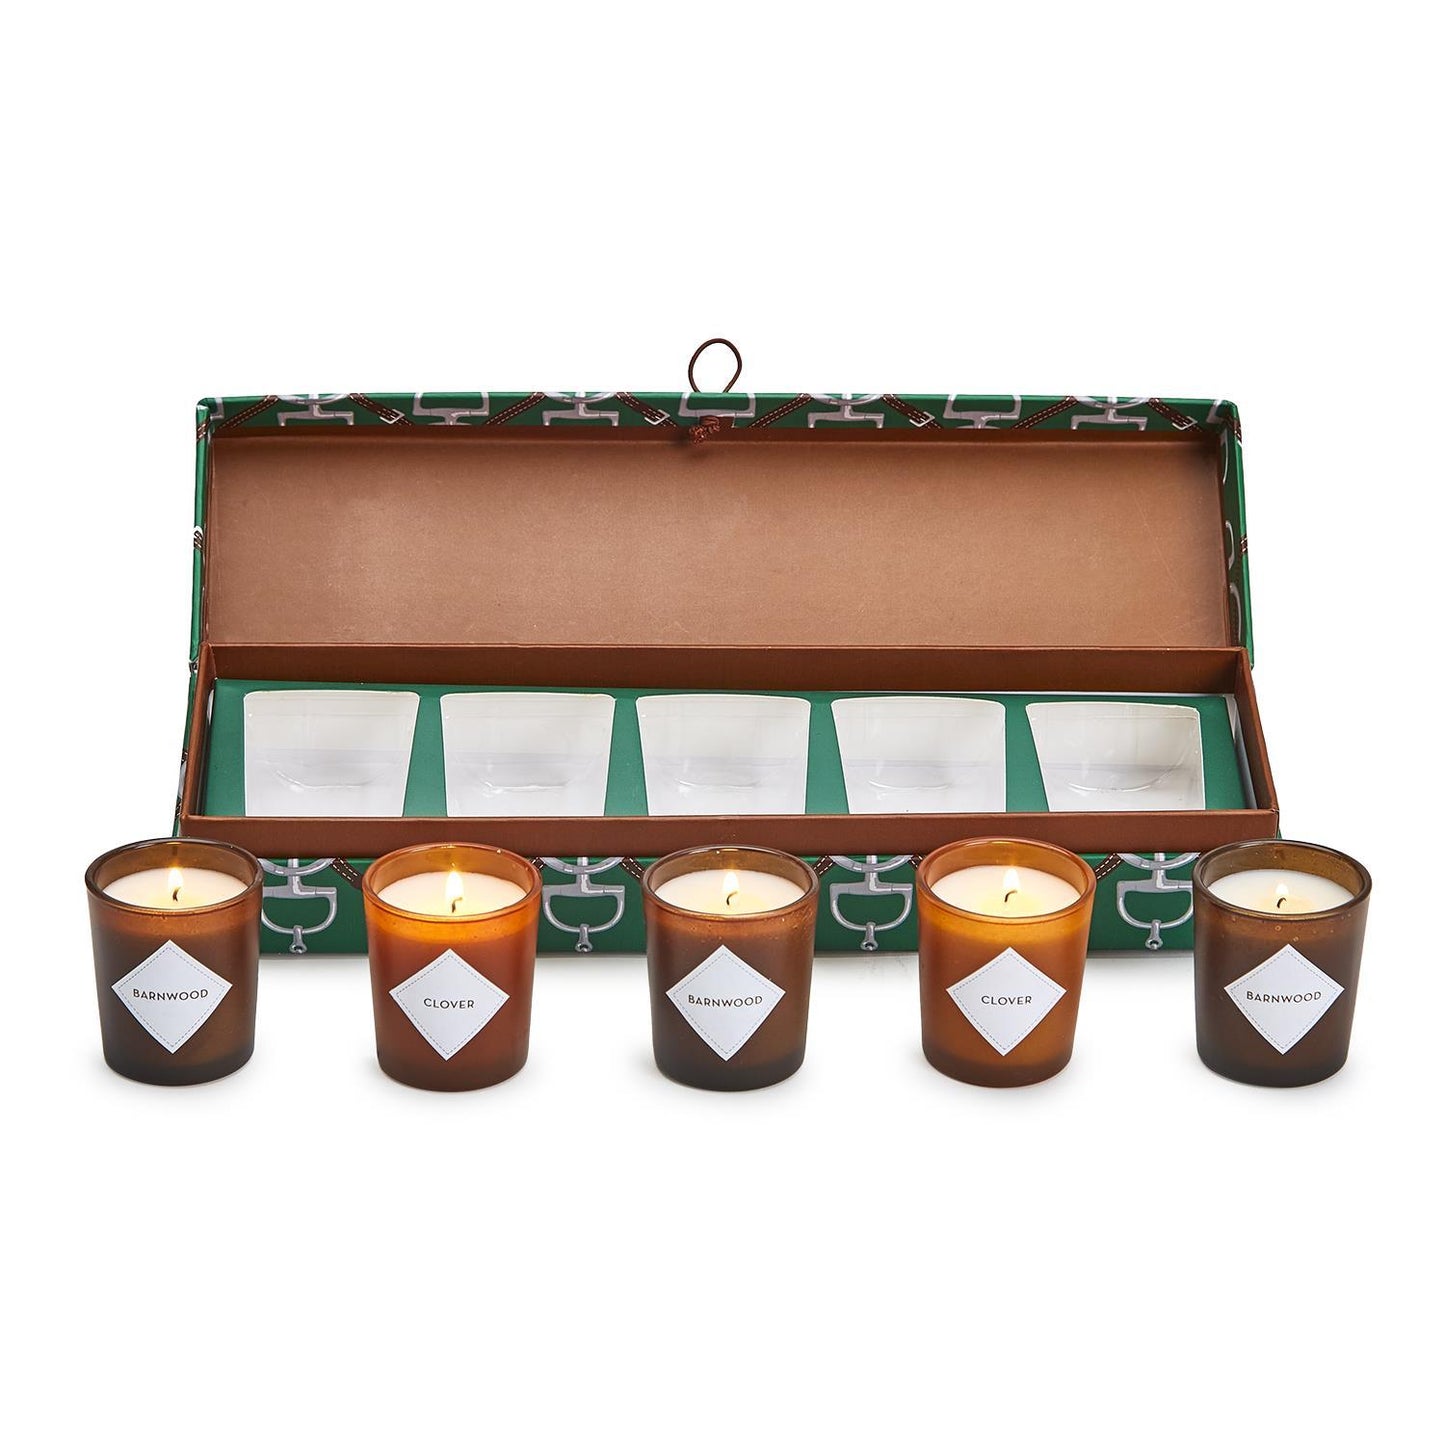 Two's Company Equus Set Of 5 Votive Candles In Gift Box Includes 2 Scents